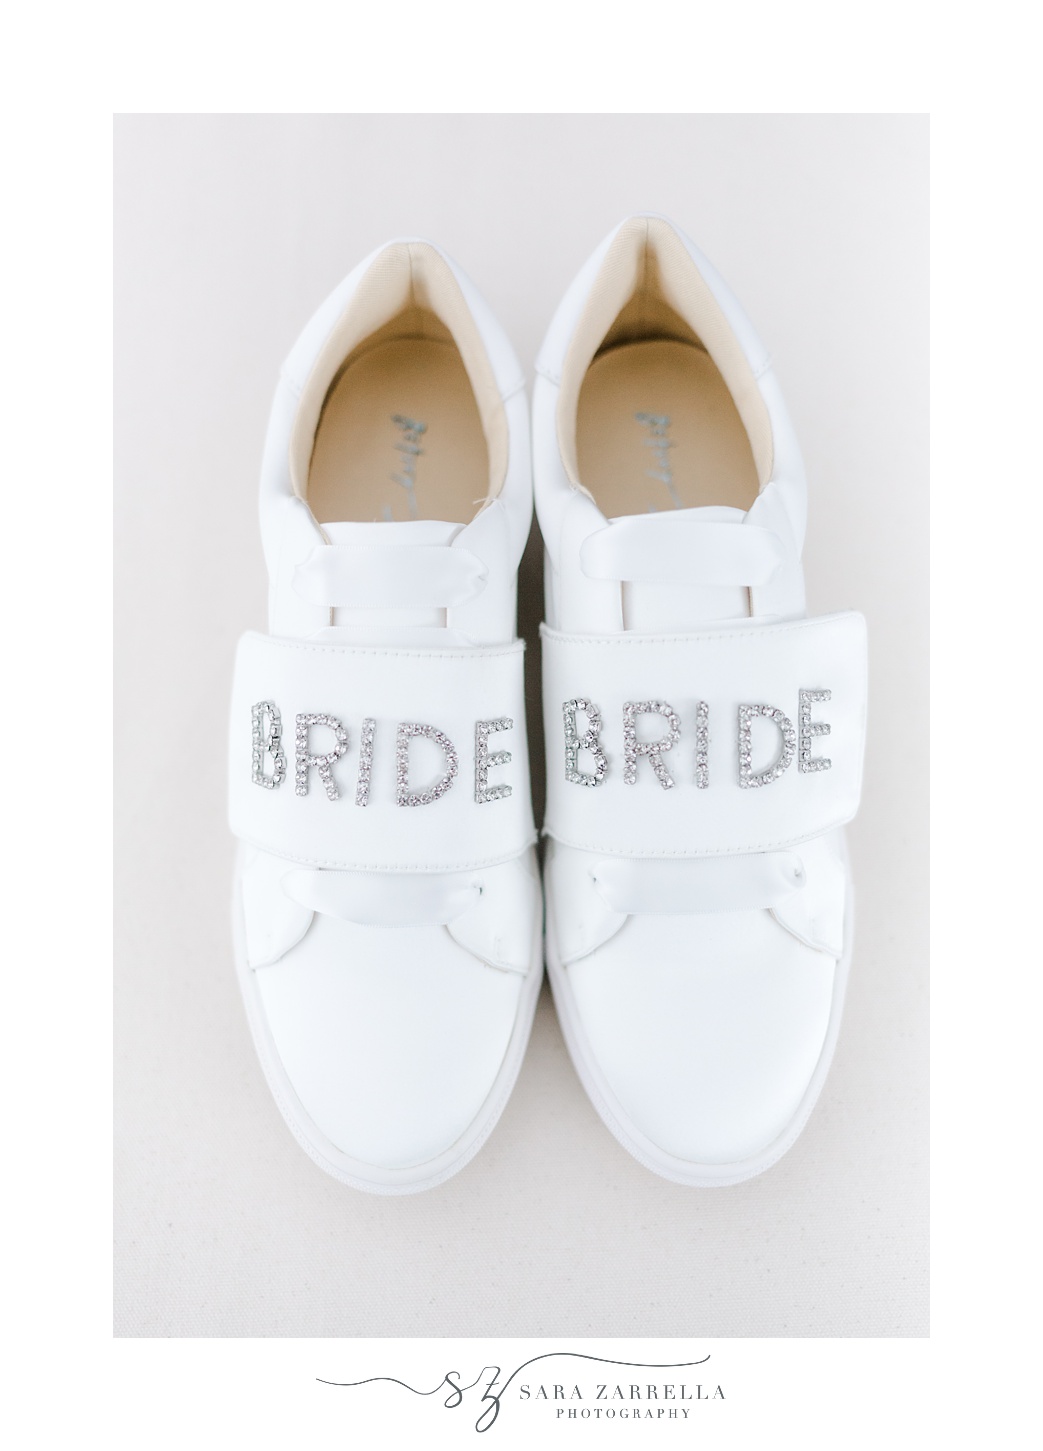 bride's tennis shoes with bedazzled BRIDE on strap